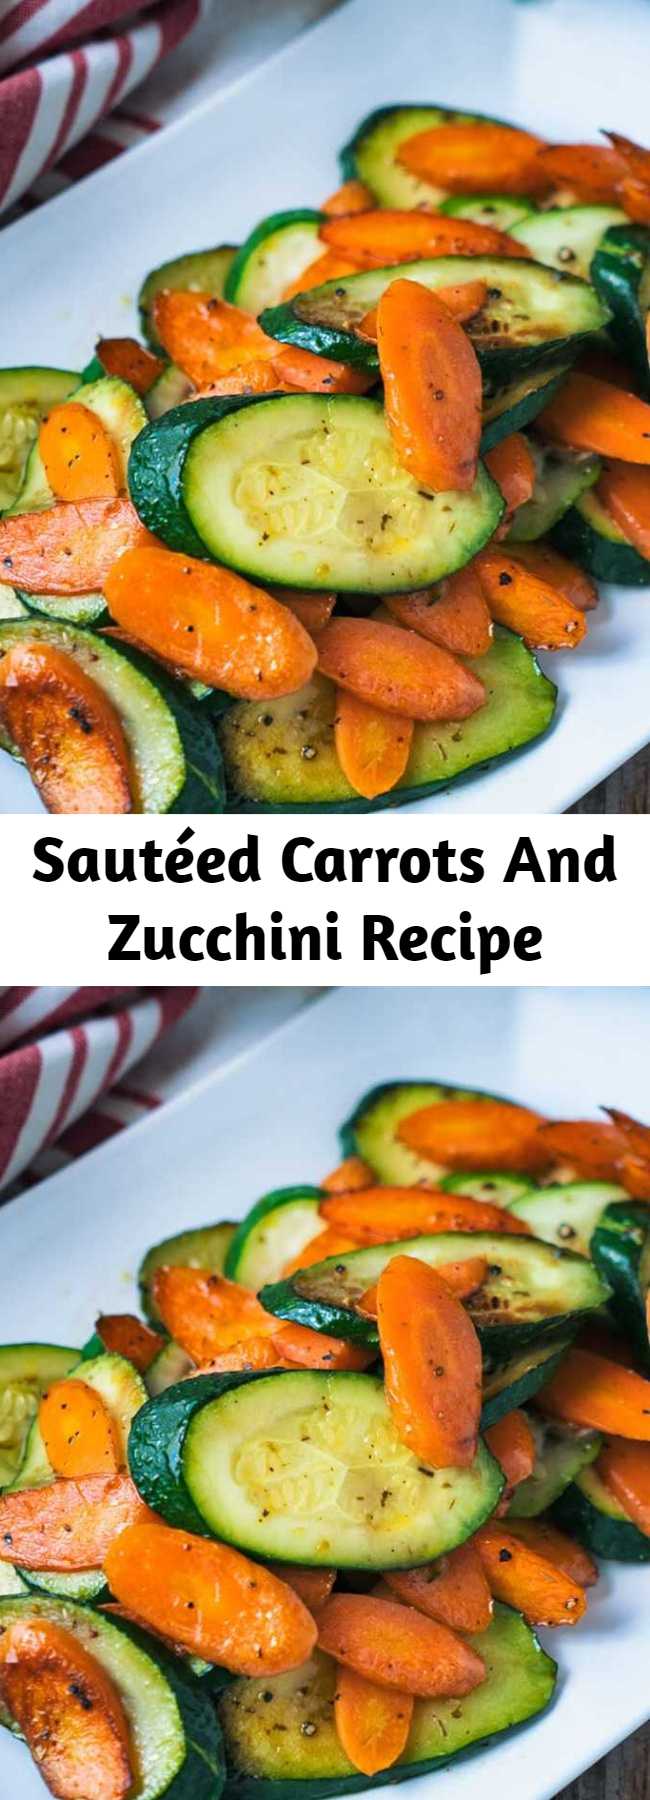 Sautéed Carrots And Zucchini Recipe - Carrots and zucchini sautéed in olive oil with an abundance of spices, really do make dinner come alive. Perfect when paired with an entire baked chicken.